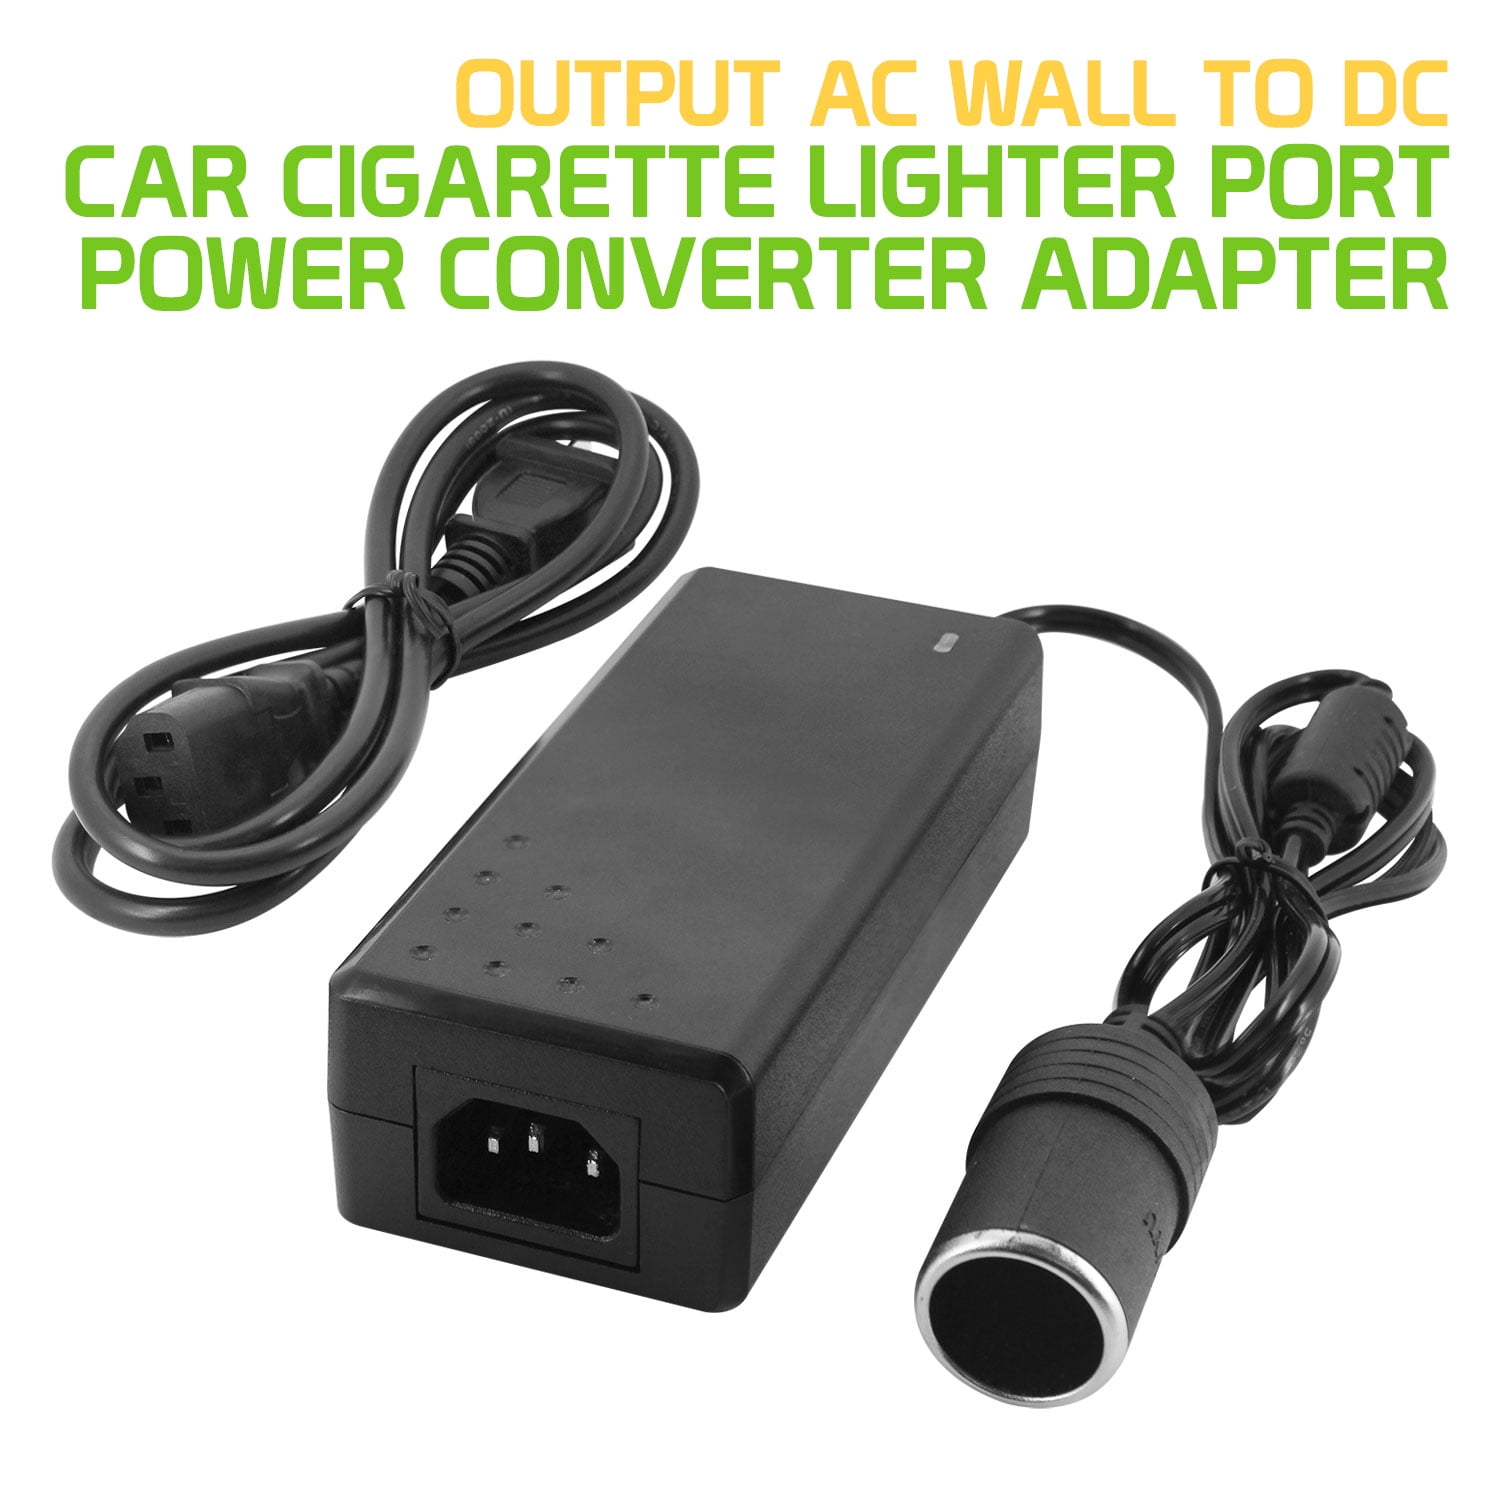 AC to DC Converter, 102W 110-220V to 12V Car Cigarette Lighter Socket AC/DC Auxiliary Power Adapter for Diesel Heater Car Vacuum Cleaner, Air Compressor Tire Inflator, Portable Fridge - Walmart.com